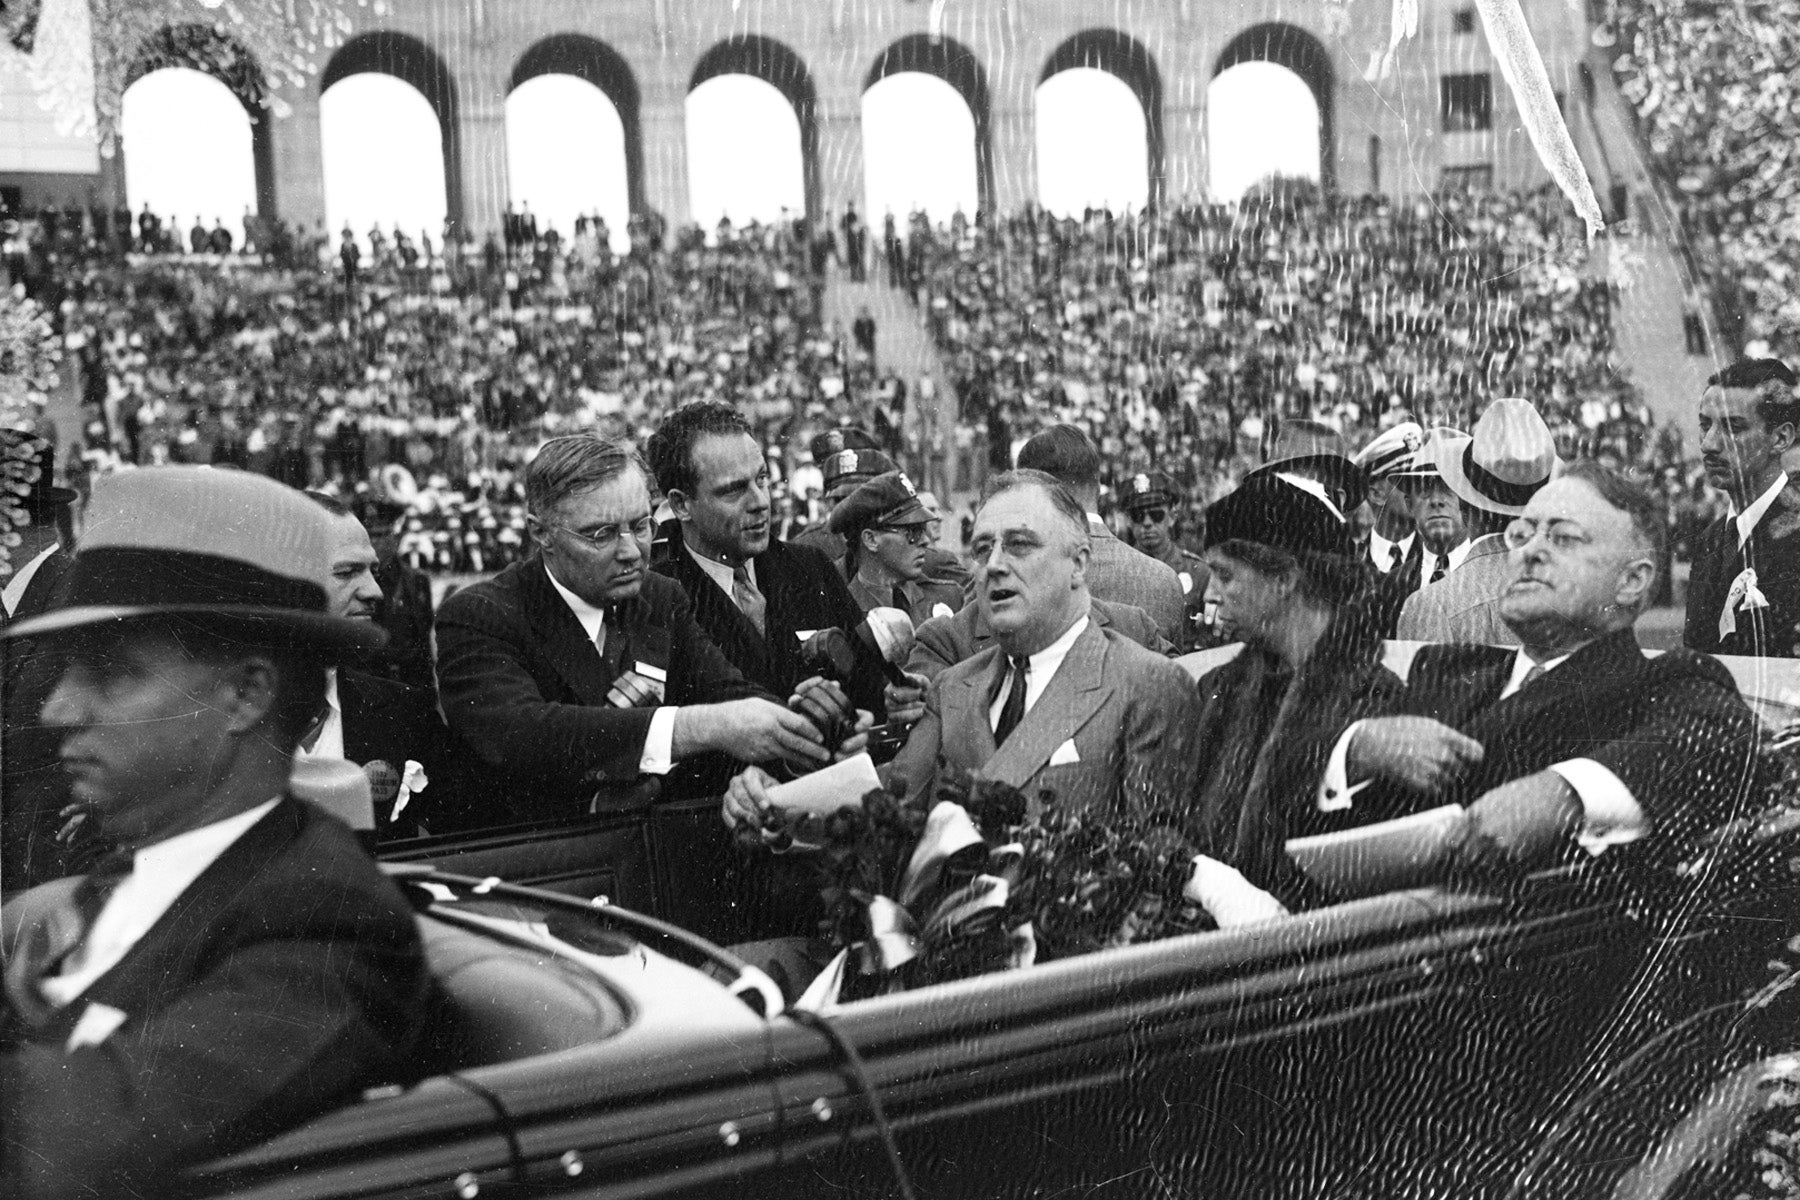 The Roosevelts visit the Coliseum in 1935